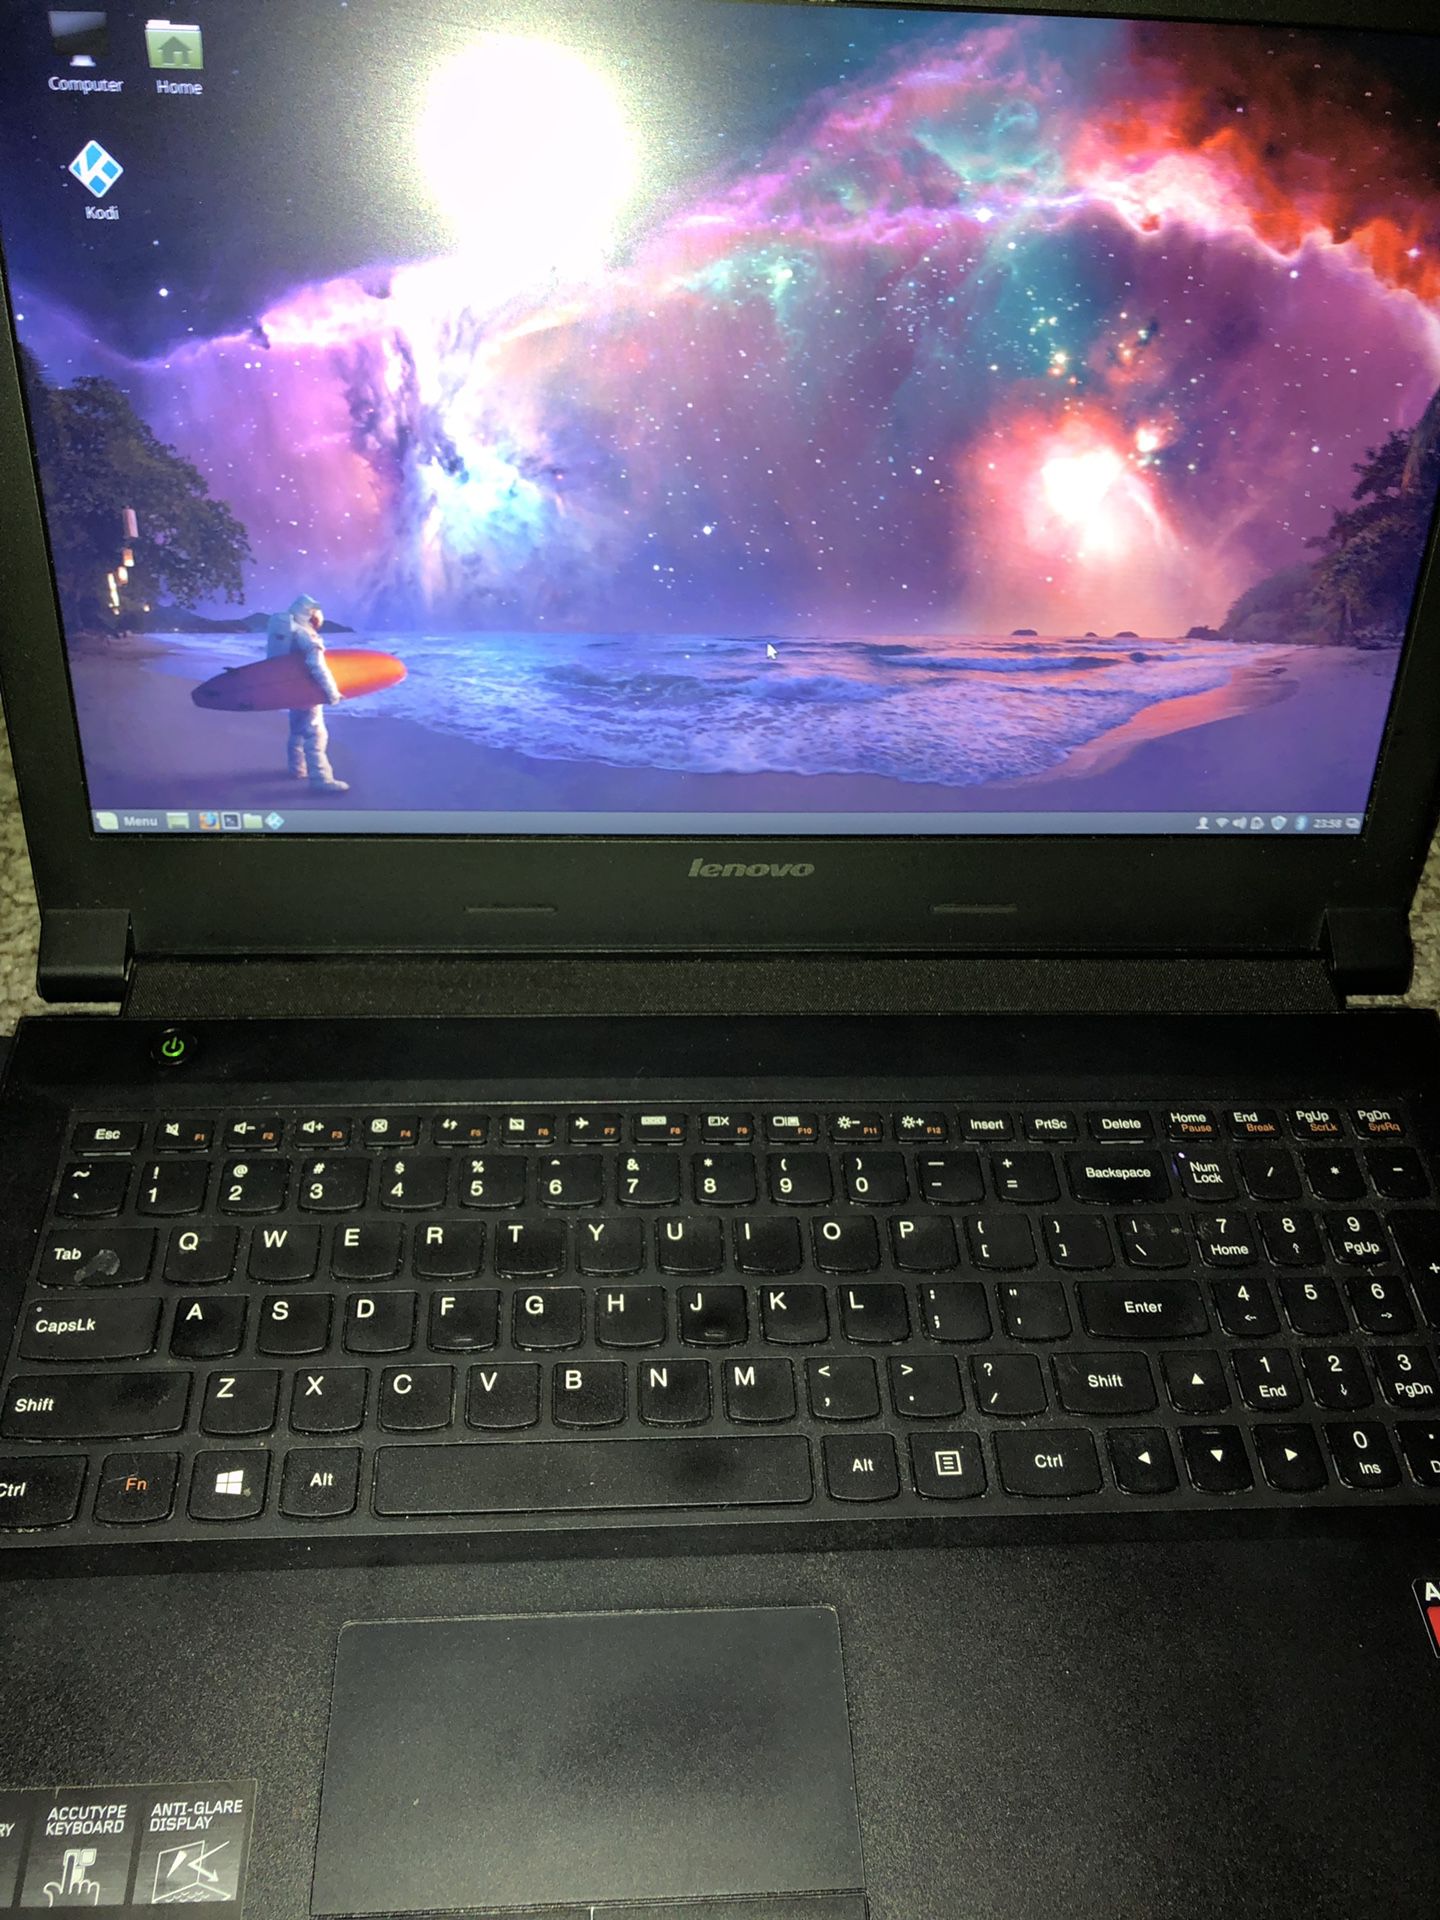 Lenovo 15.6” Laptop with Linux OS